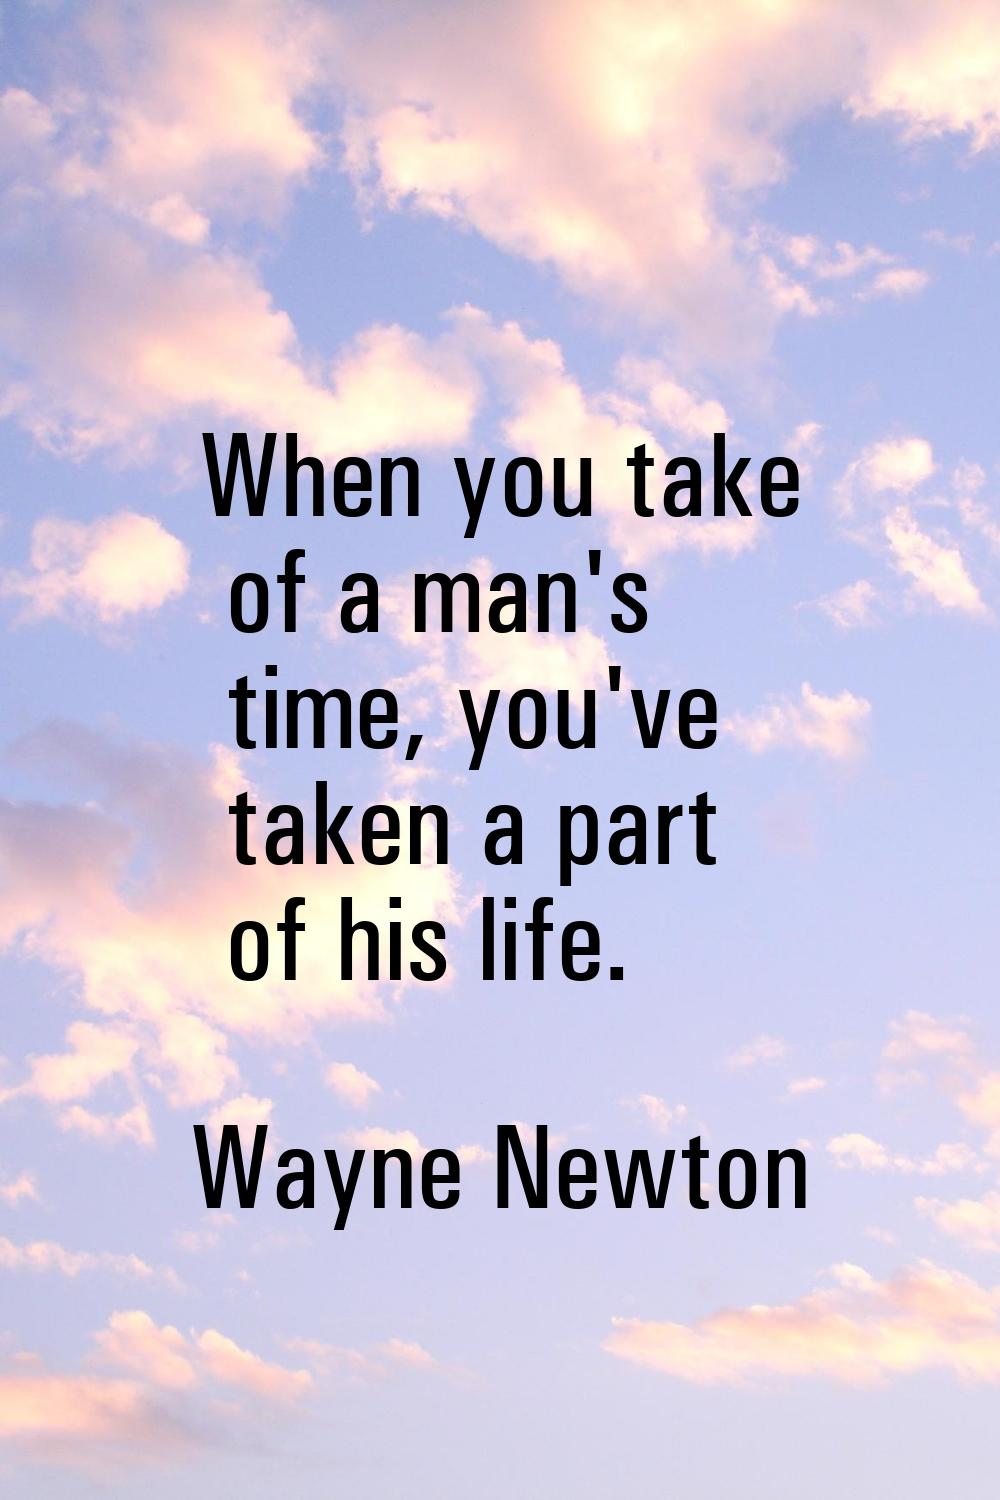 When you take of a man's time, you've taken a part of his life.